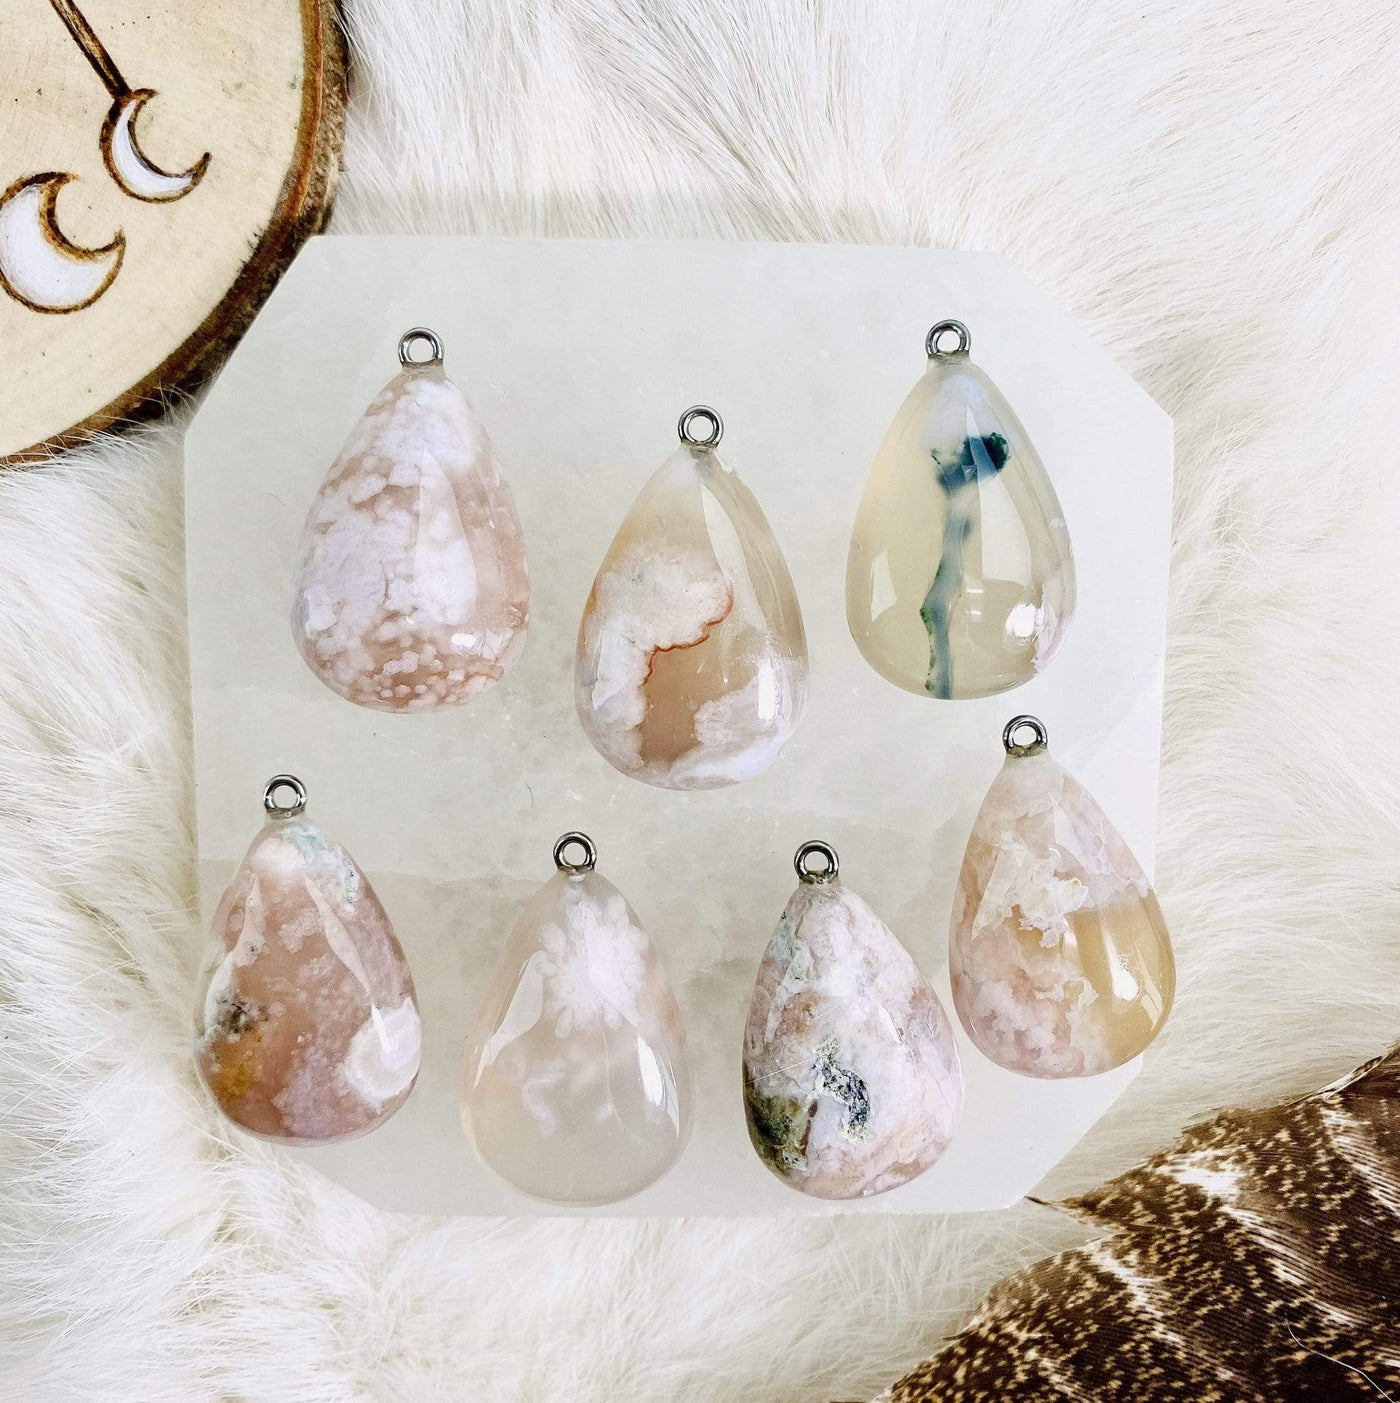 Flower Agate Tumbled Pendants with Silver Bail on white background.